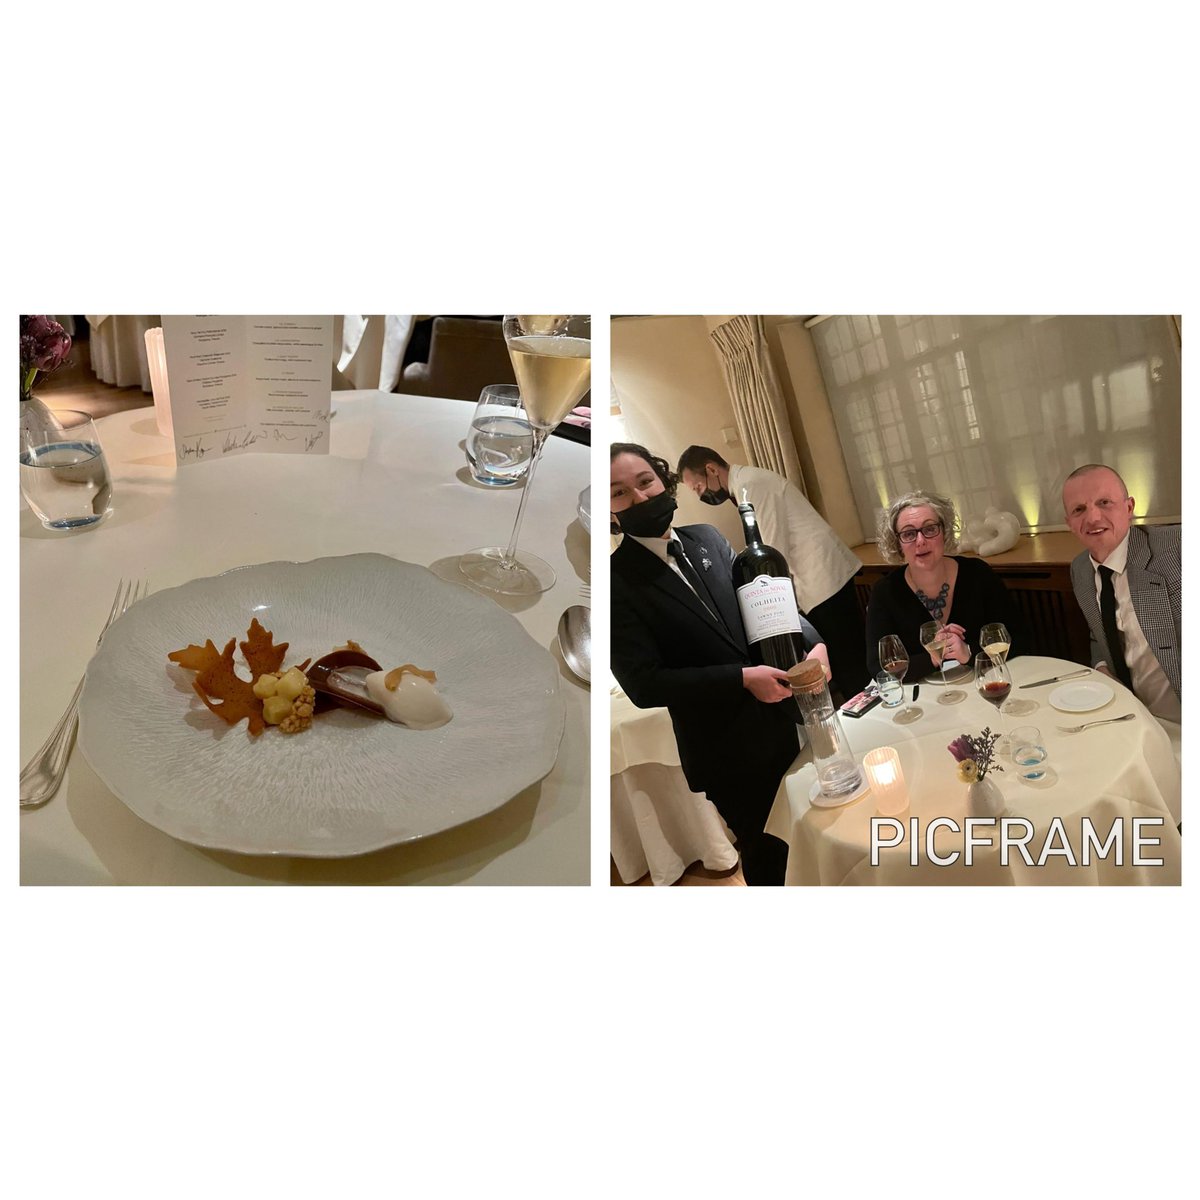 Absolutely stunning menu @lemanoir last night presentation,food and service absolutely faultless what an unbelievable experience we had a huge thank you to all the staff for a night we’ll never forget ❤️🙏🏻⭐️⭐️@ChefGaryJones @raymond_blanc